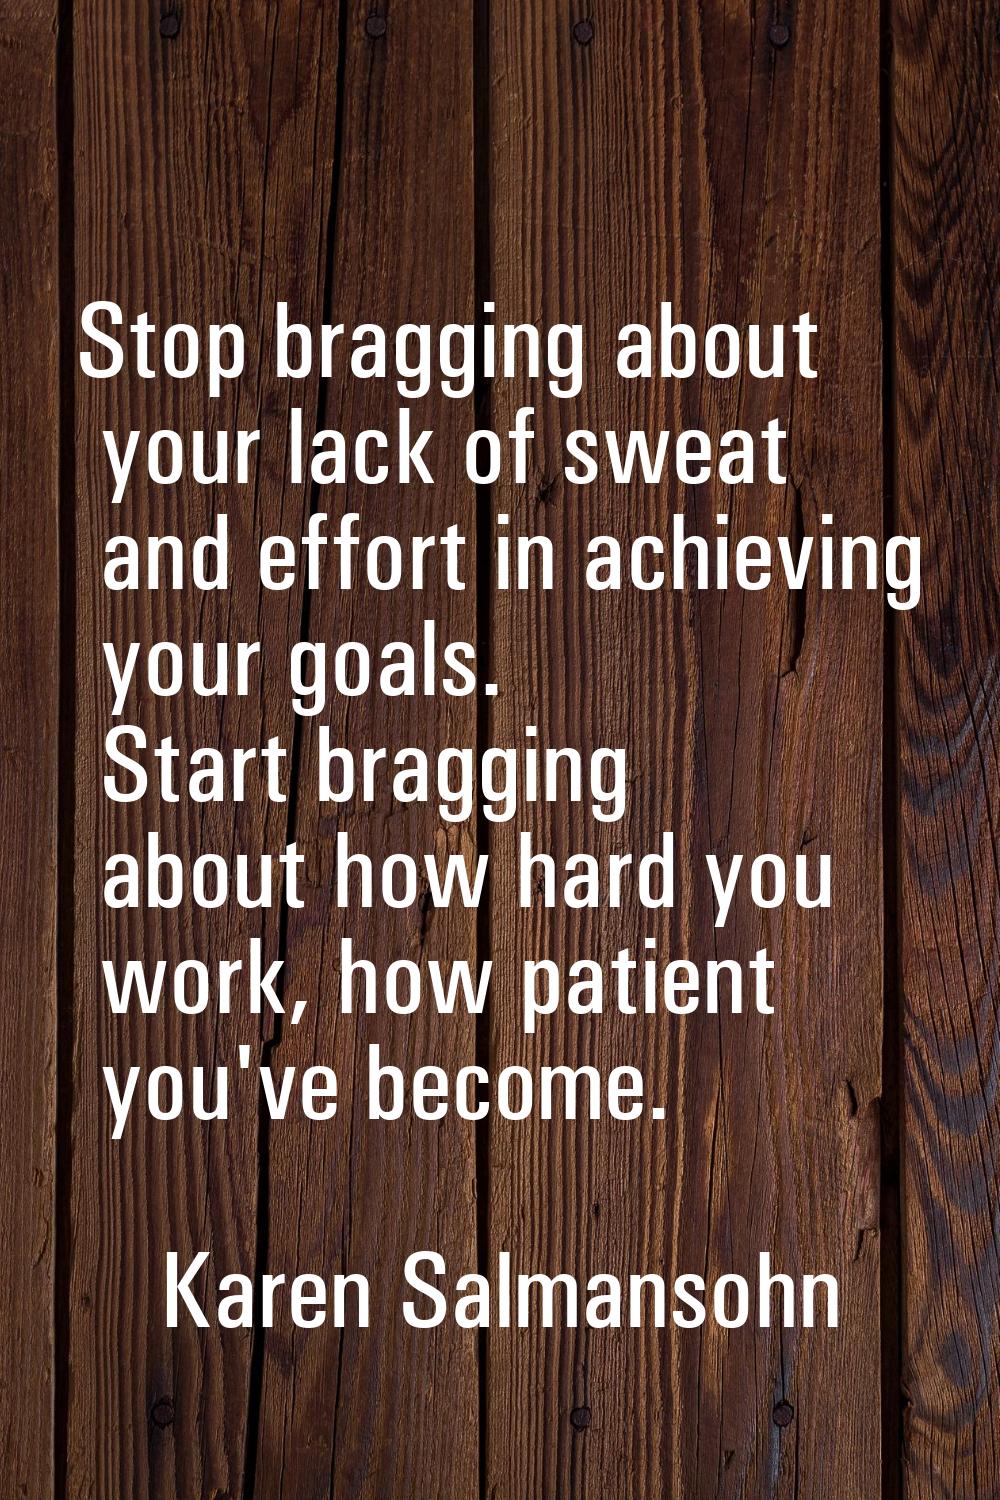 Stop bragging about your lack of sweat and effort in achieving your goals. Start bragging about how